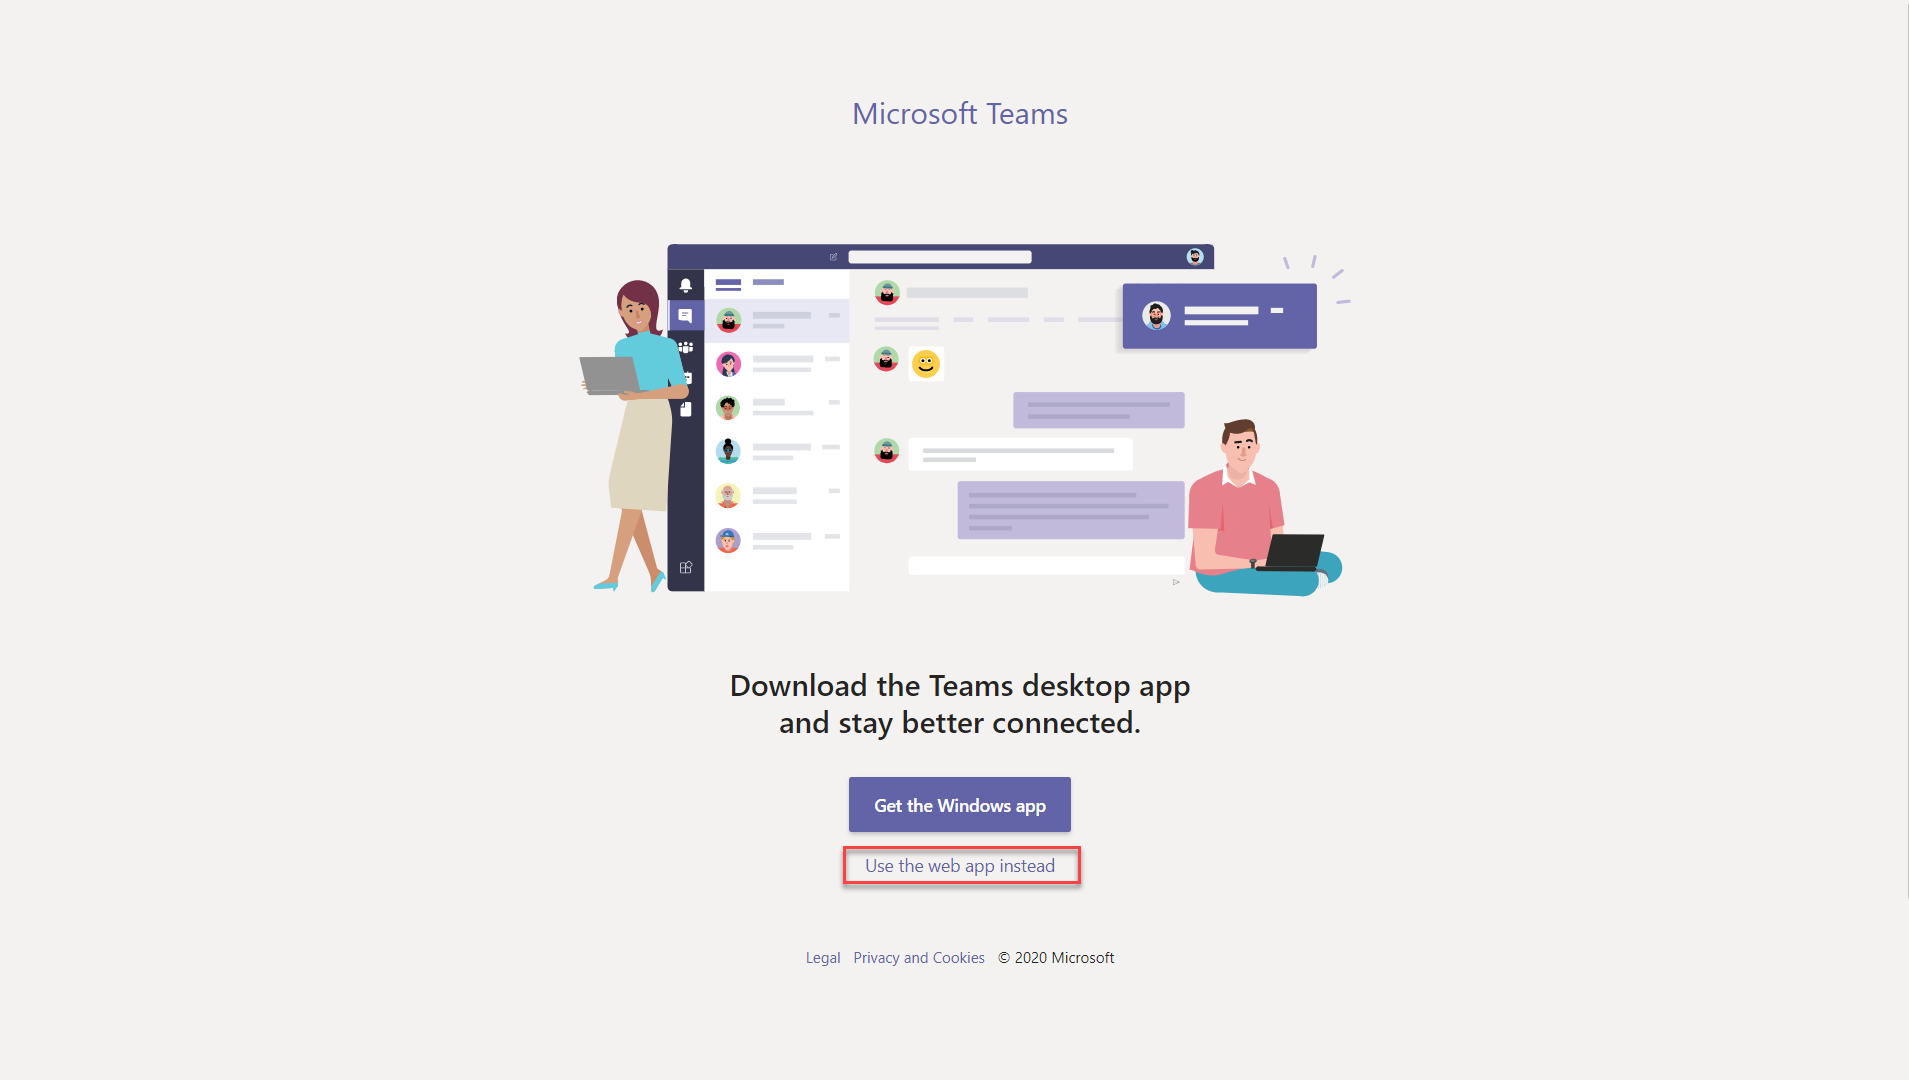 A screenshot of the Microsoft Teams landing page with a border around the use the web app instead button